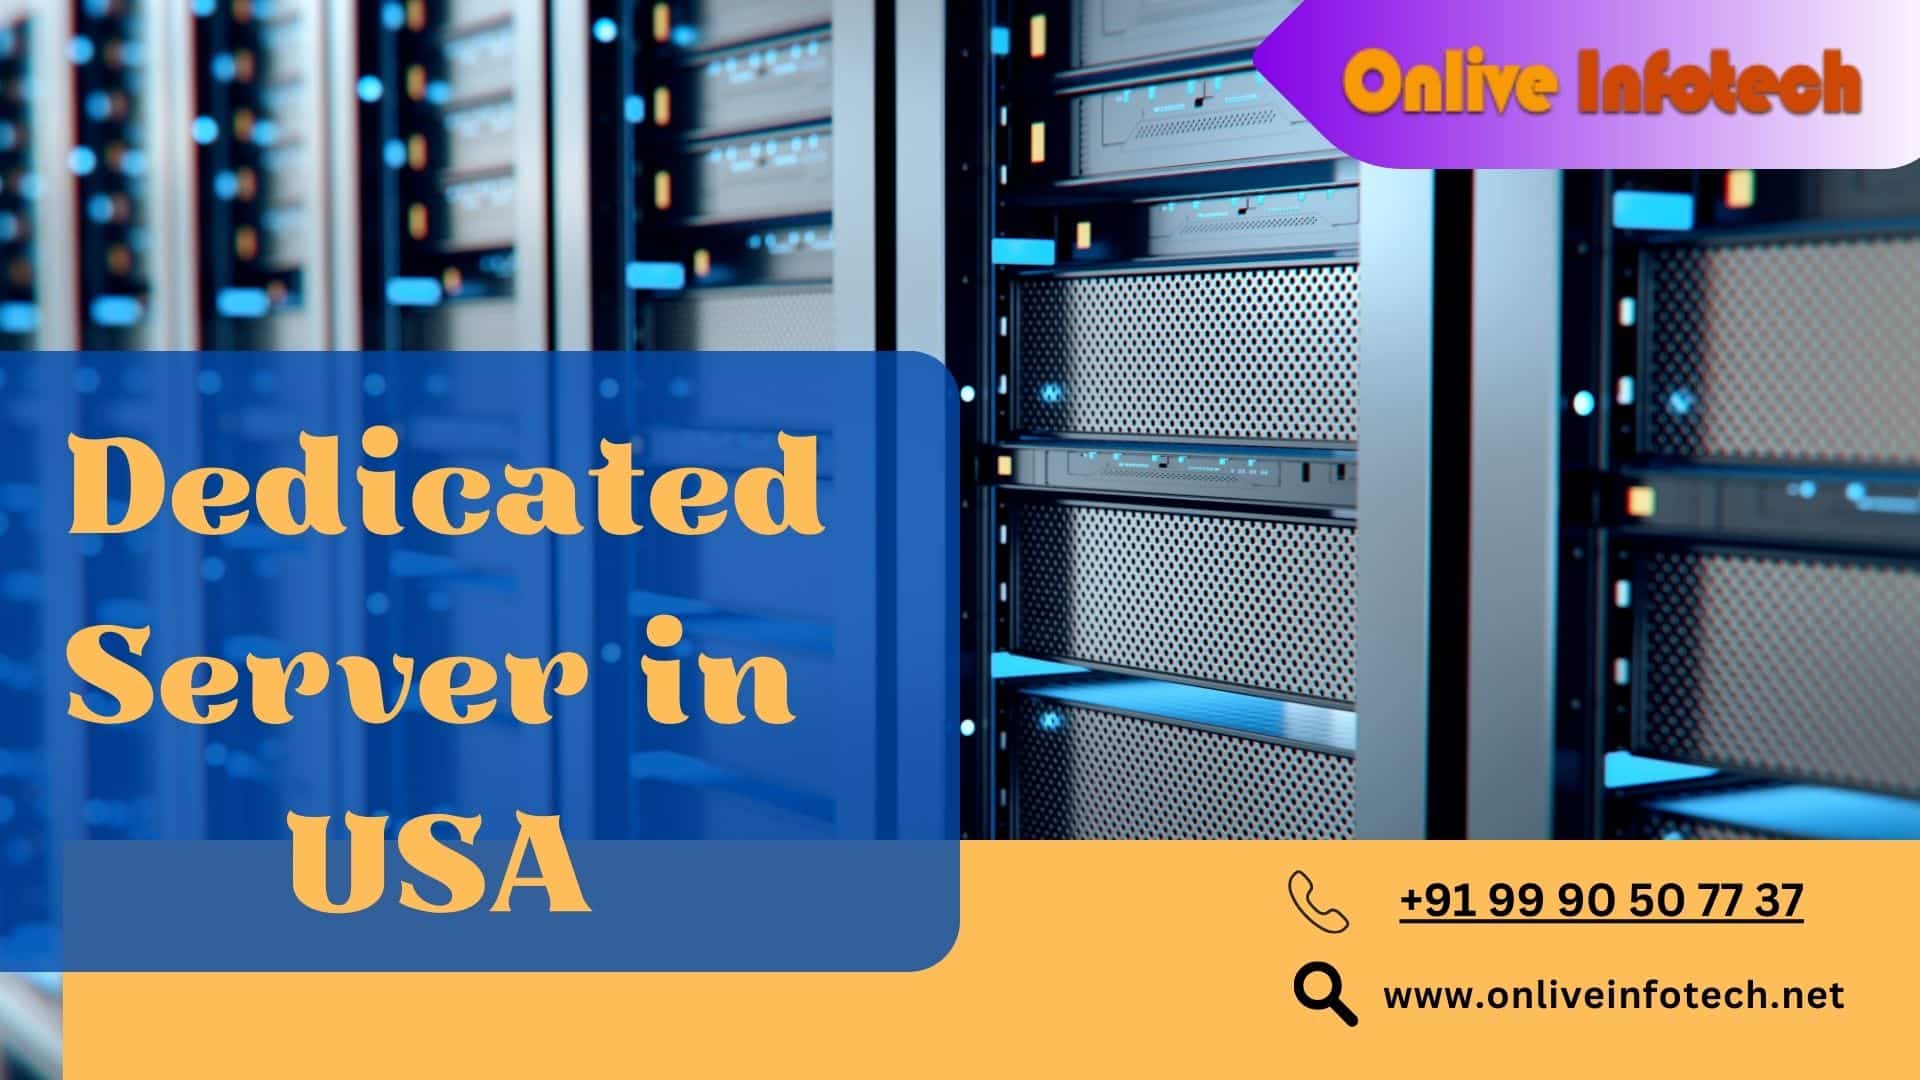 Onlive Infotech's USA Dedicated Server - Your Gateway to Superior Hosting